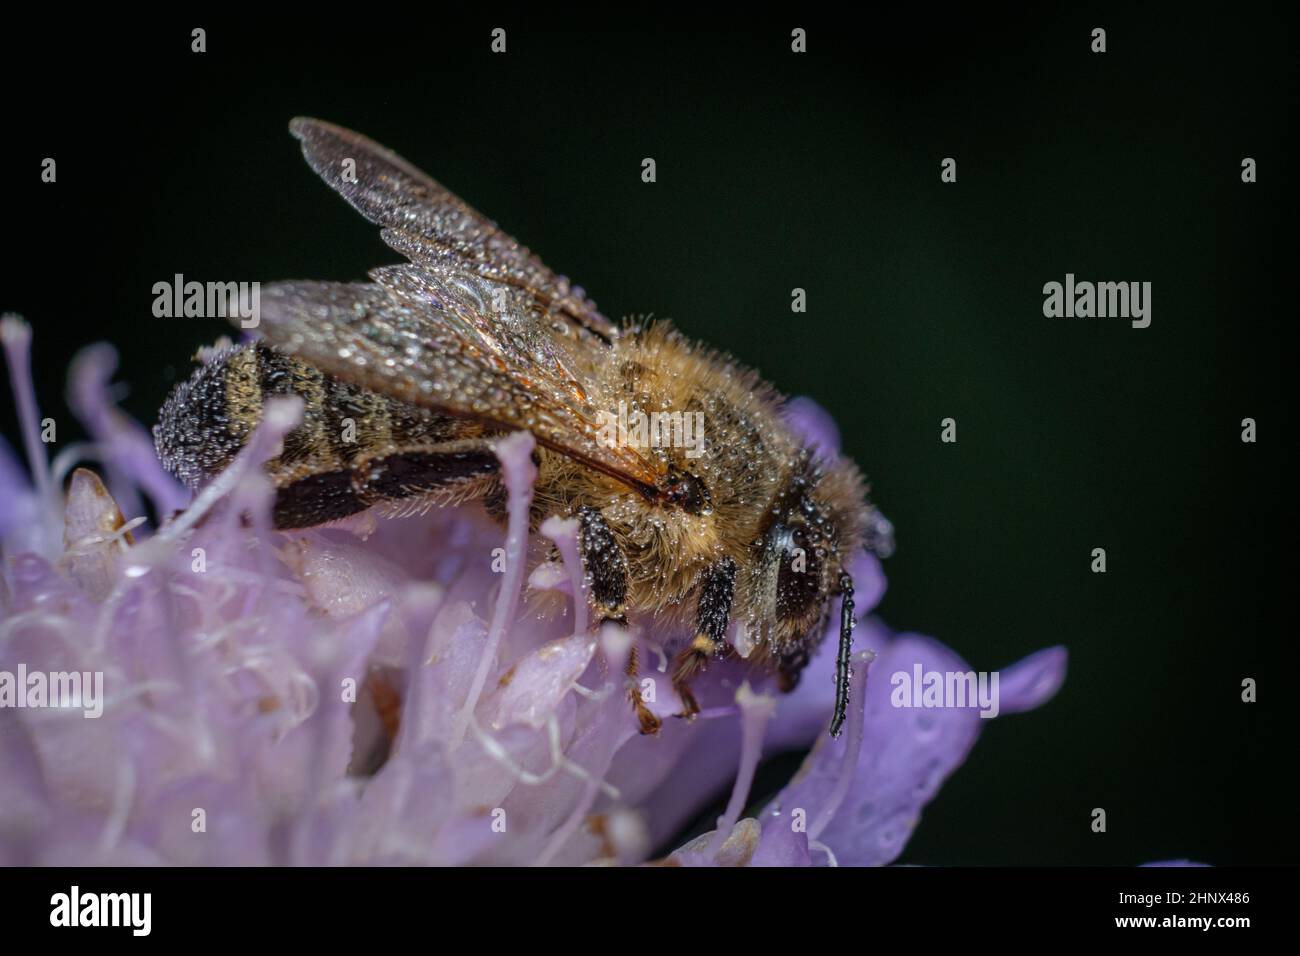 Honey bee with dew water drops close-up Stock Photo